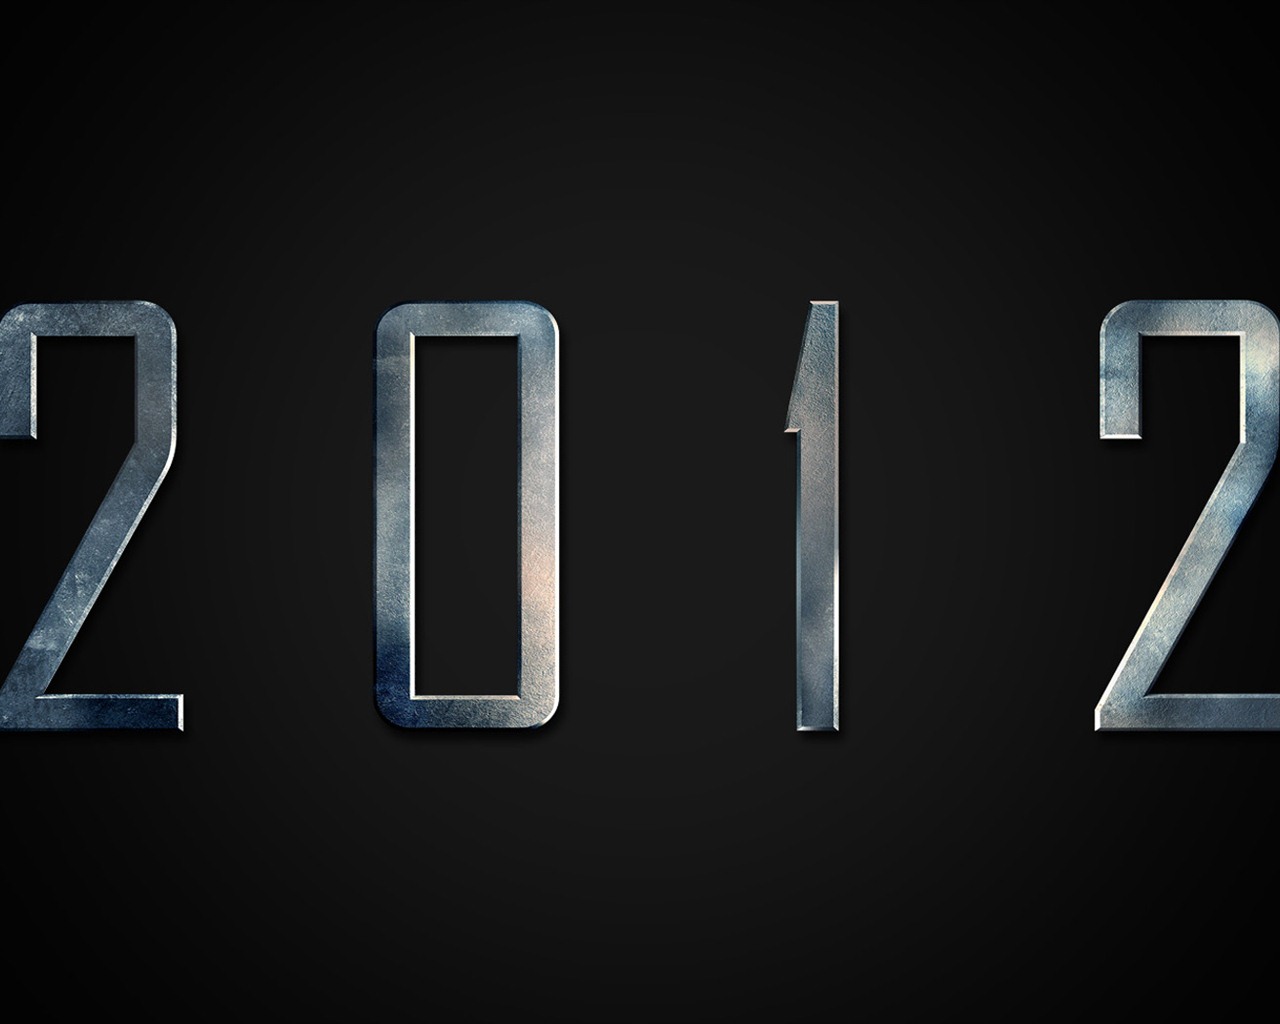 2012 New Year wallpapers (1) #12 - 1280x1024